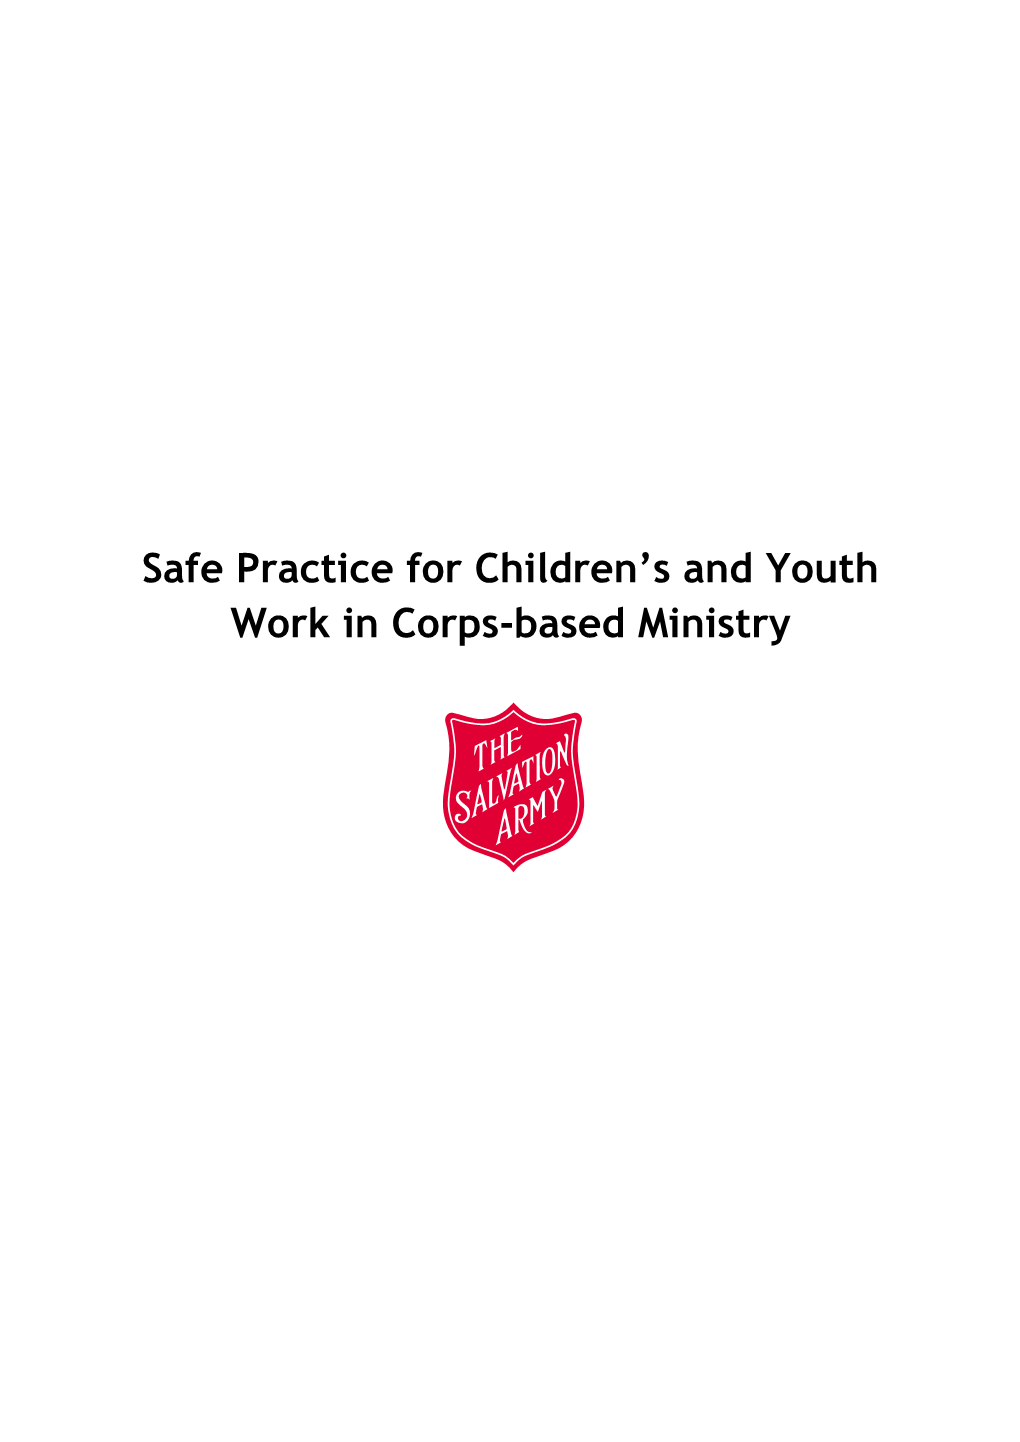 Safe Practice for Children's and Youth Work in Corps-Based Ministry